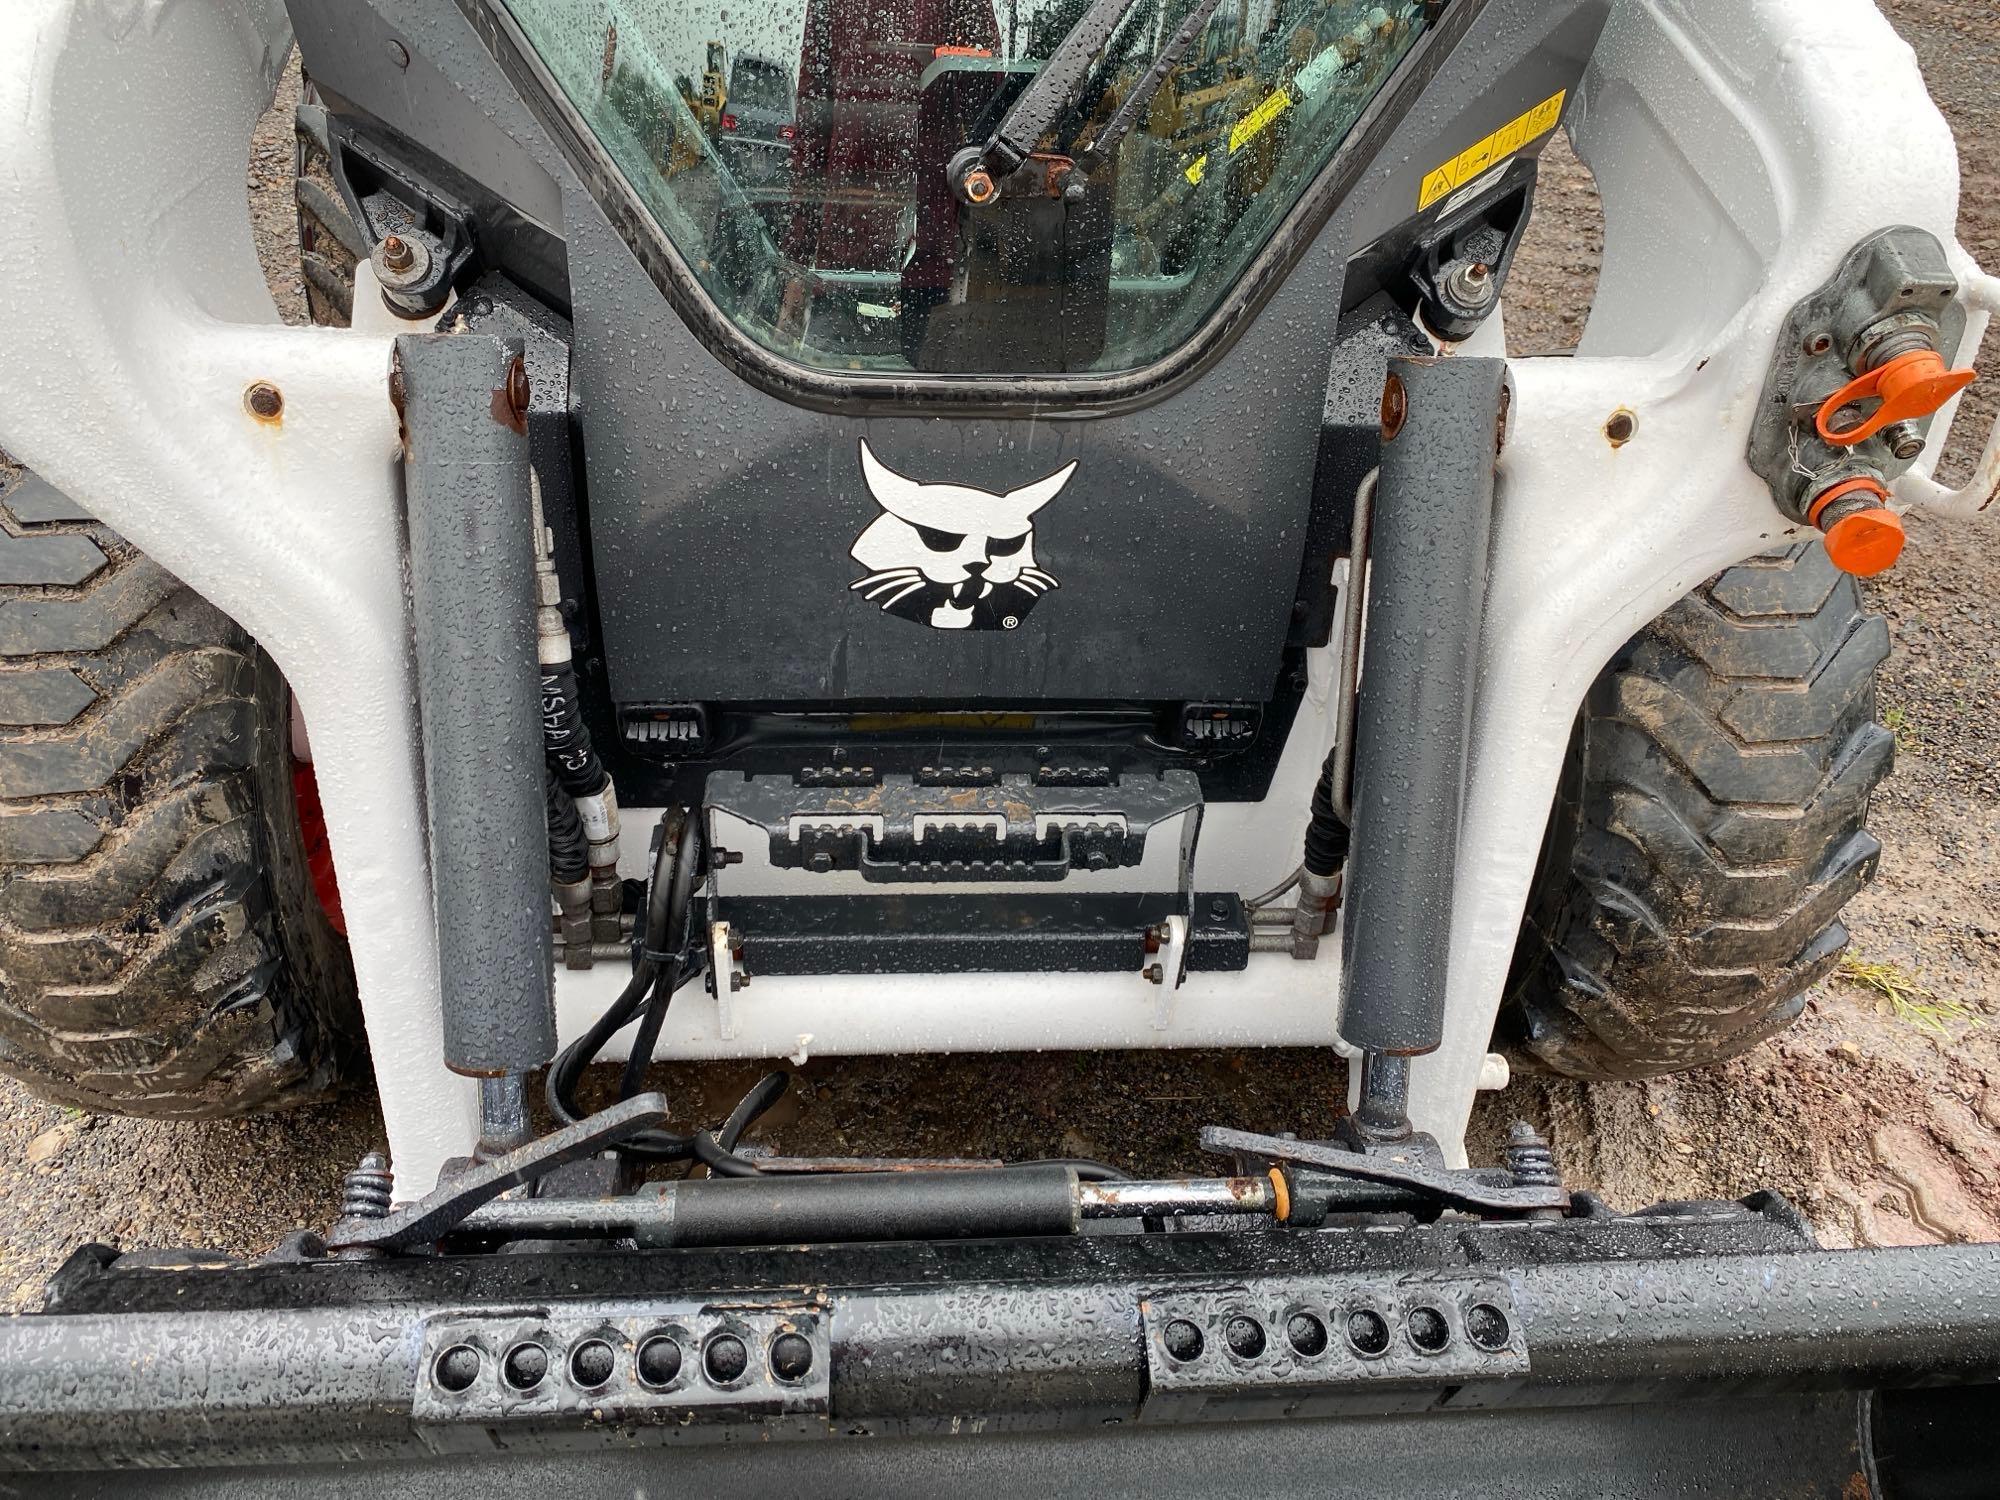 2020 BOBCAT S64 SKID STEER SN:B4SC11281 powered by diesel engine, equipped with OROPS, front blade,